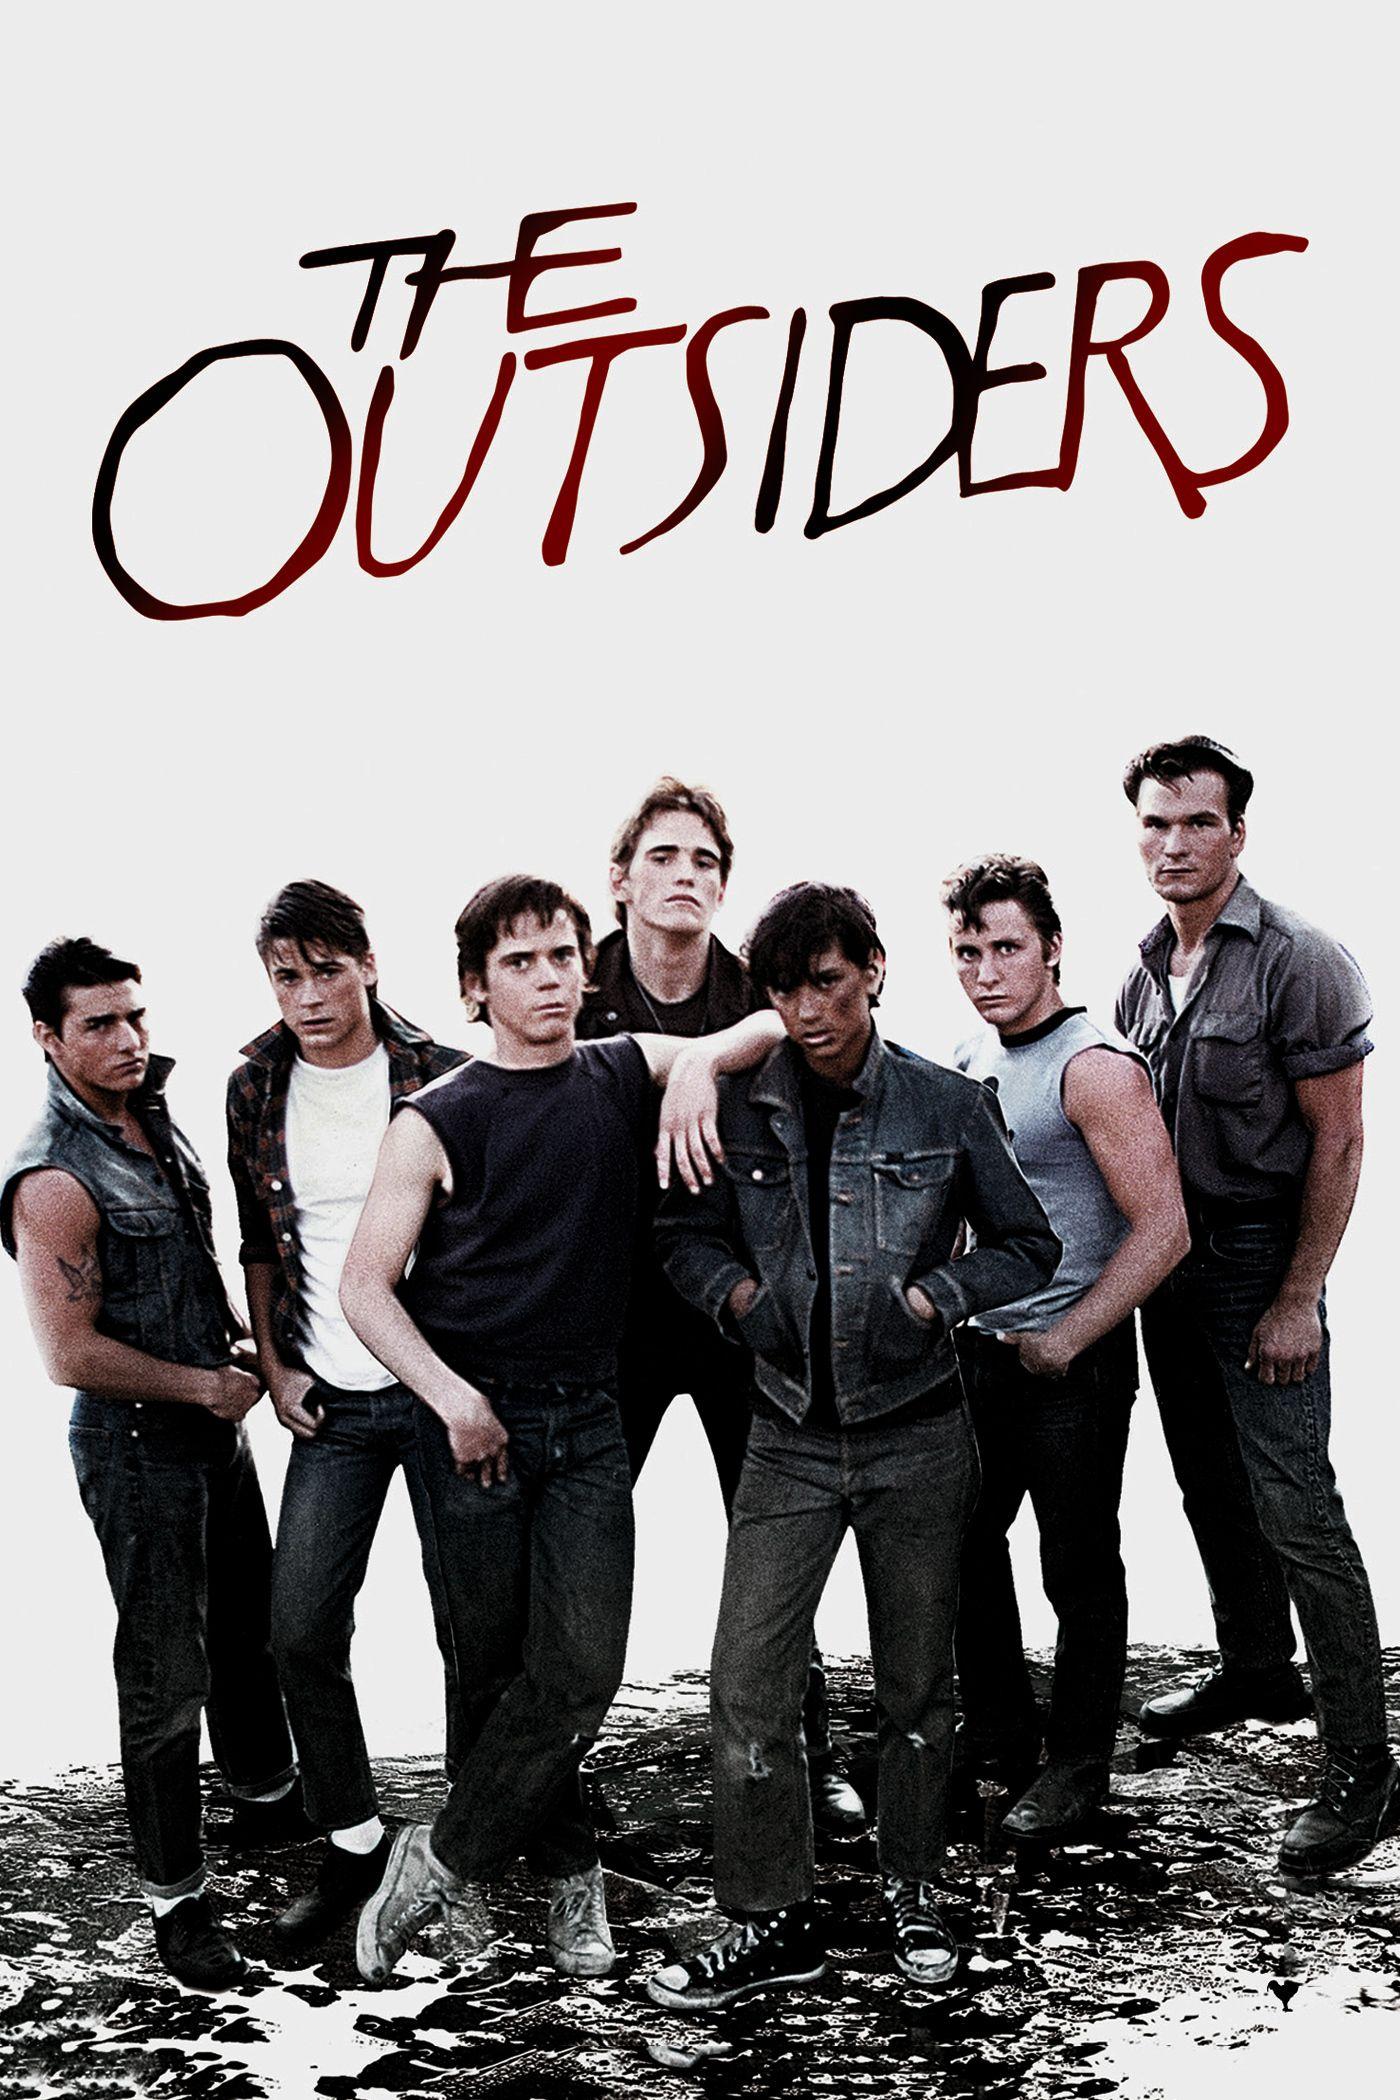 Download The Outsiders Wallpaper Gallery